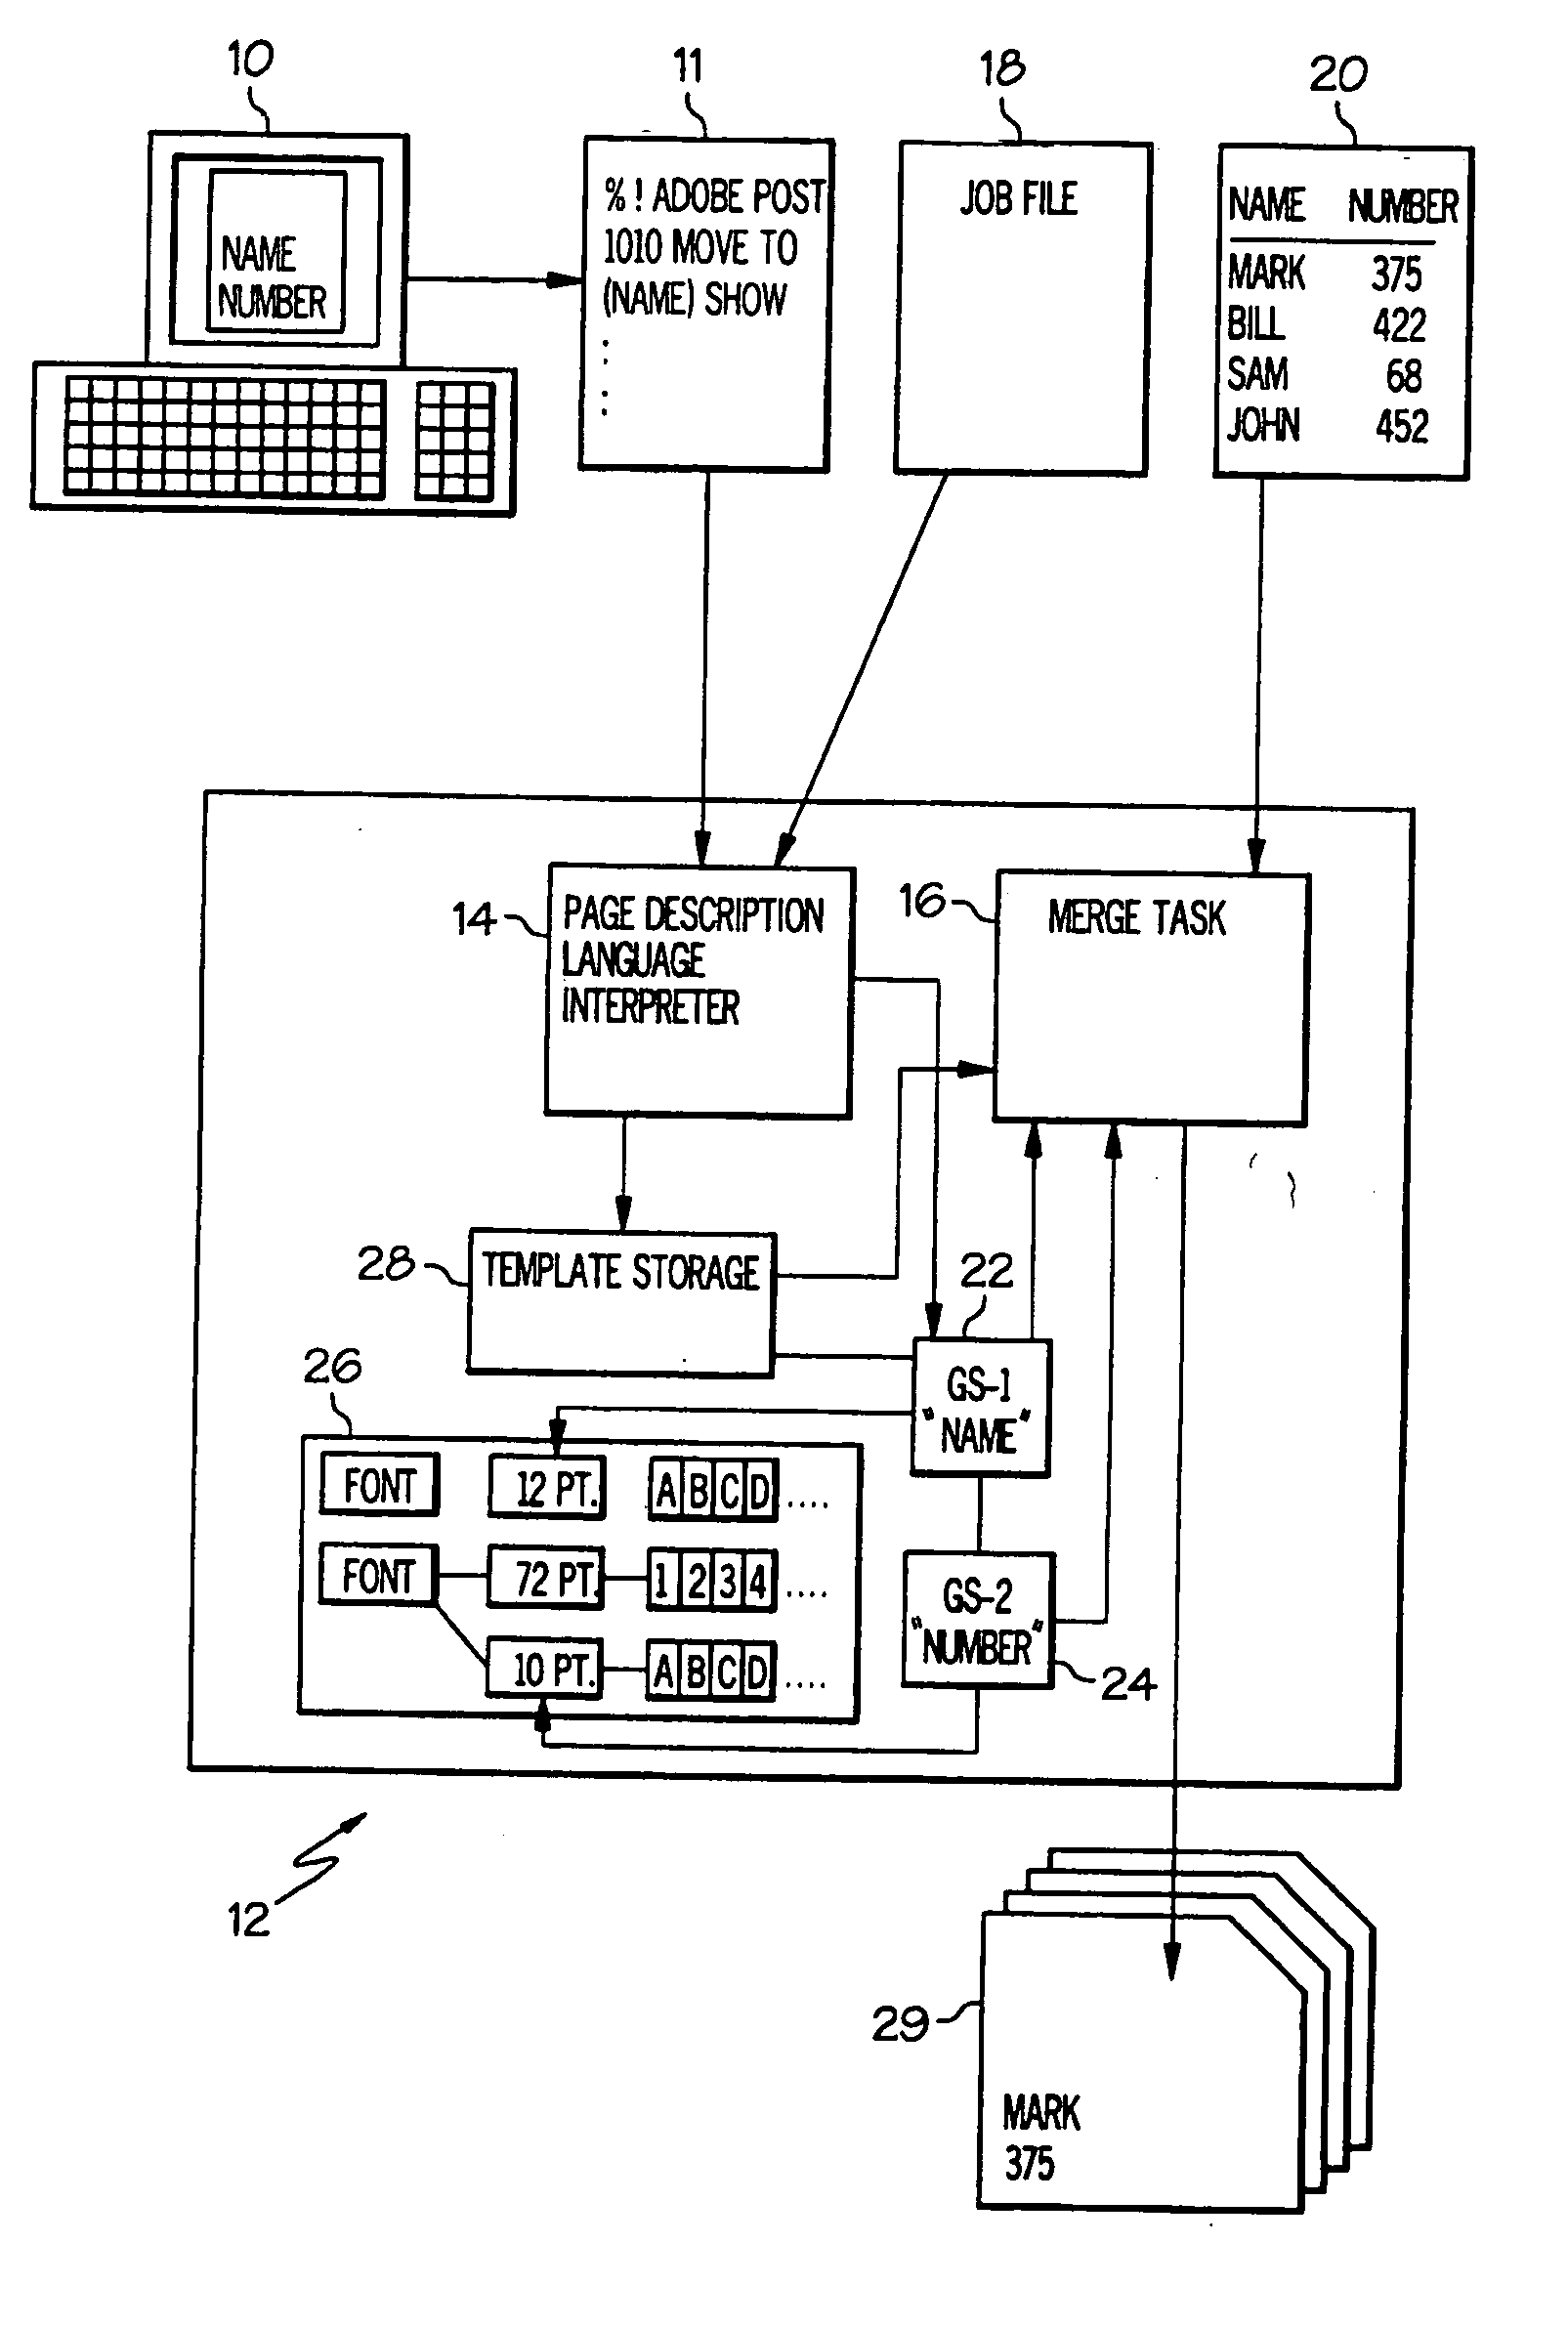 Method of utilizing variable data fields with a page description language